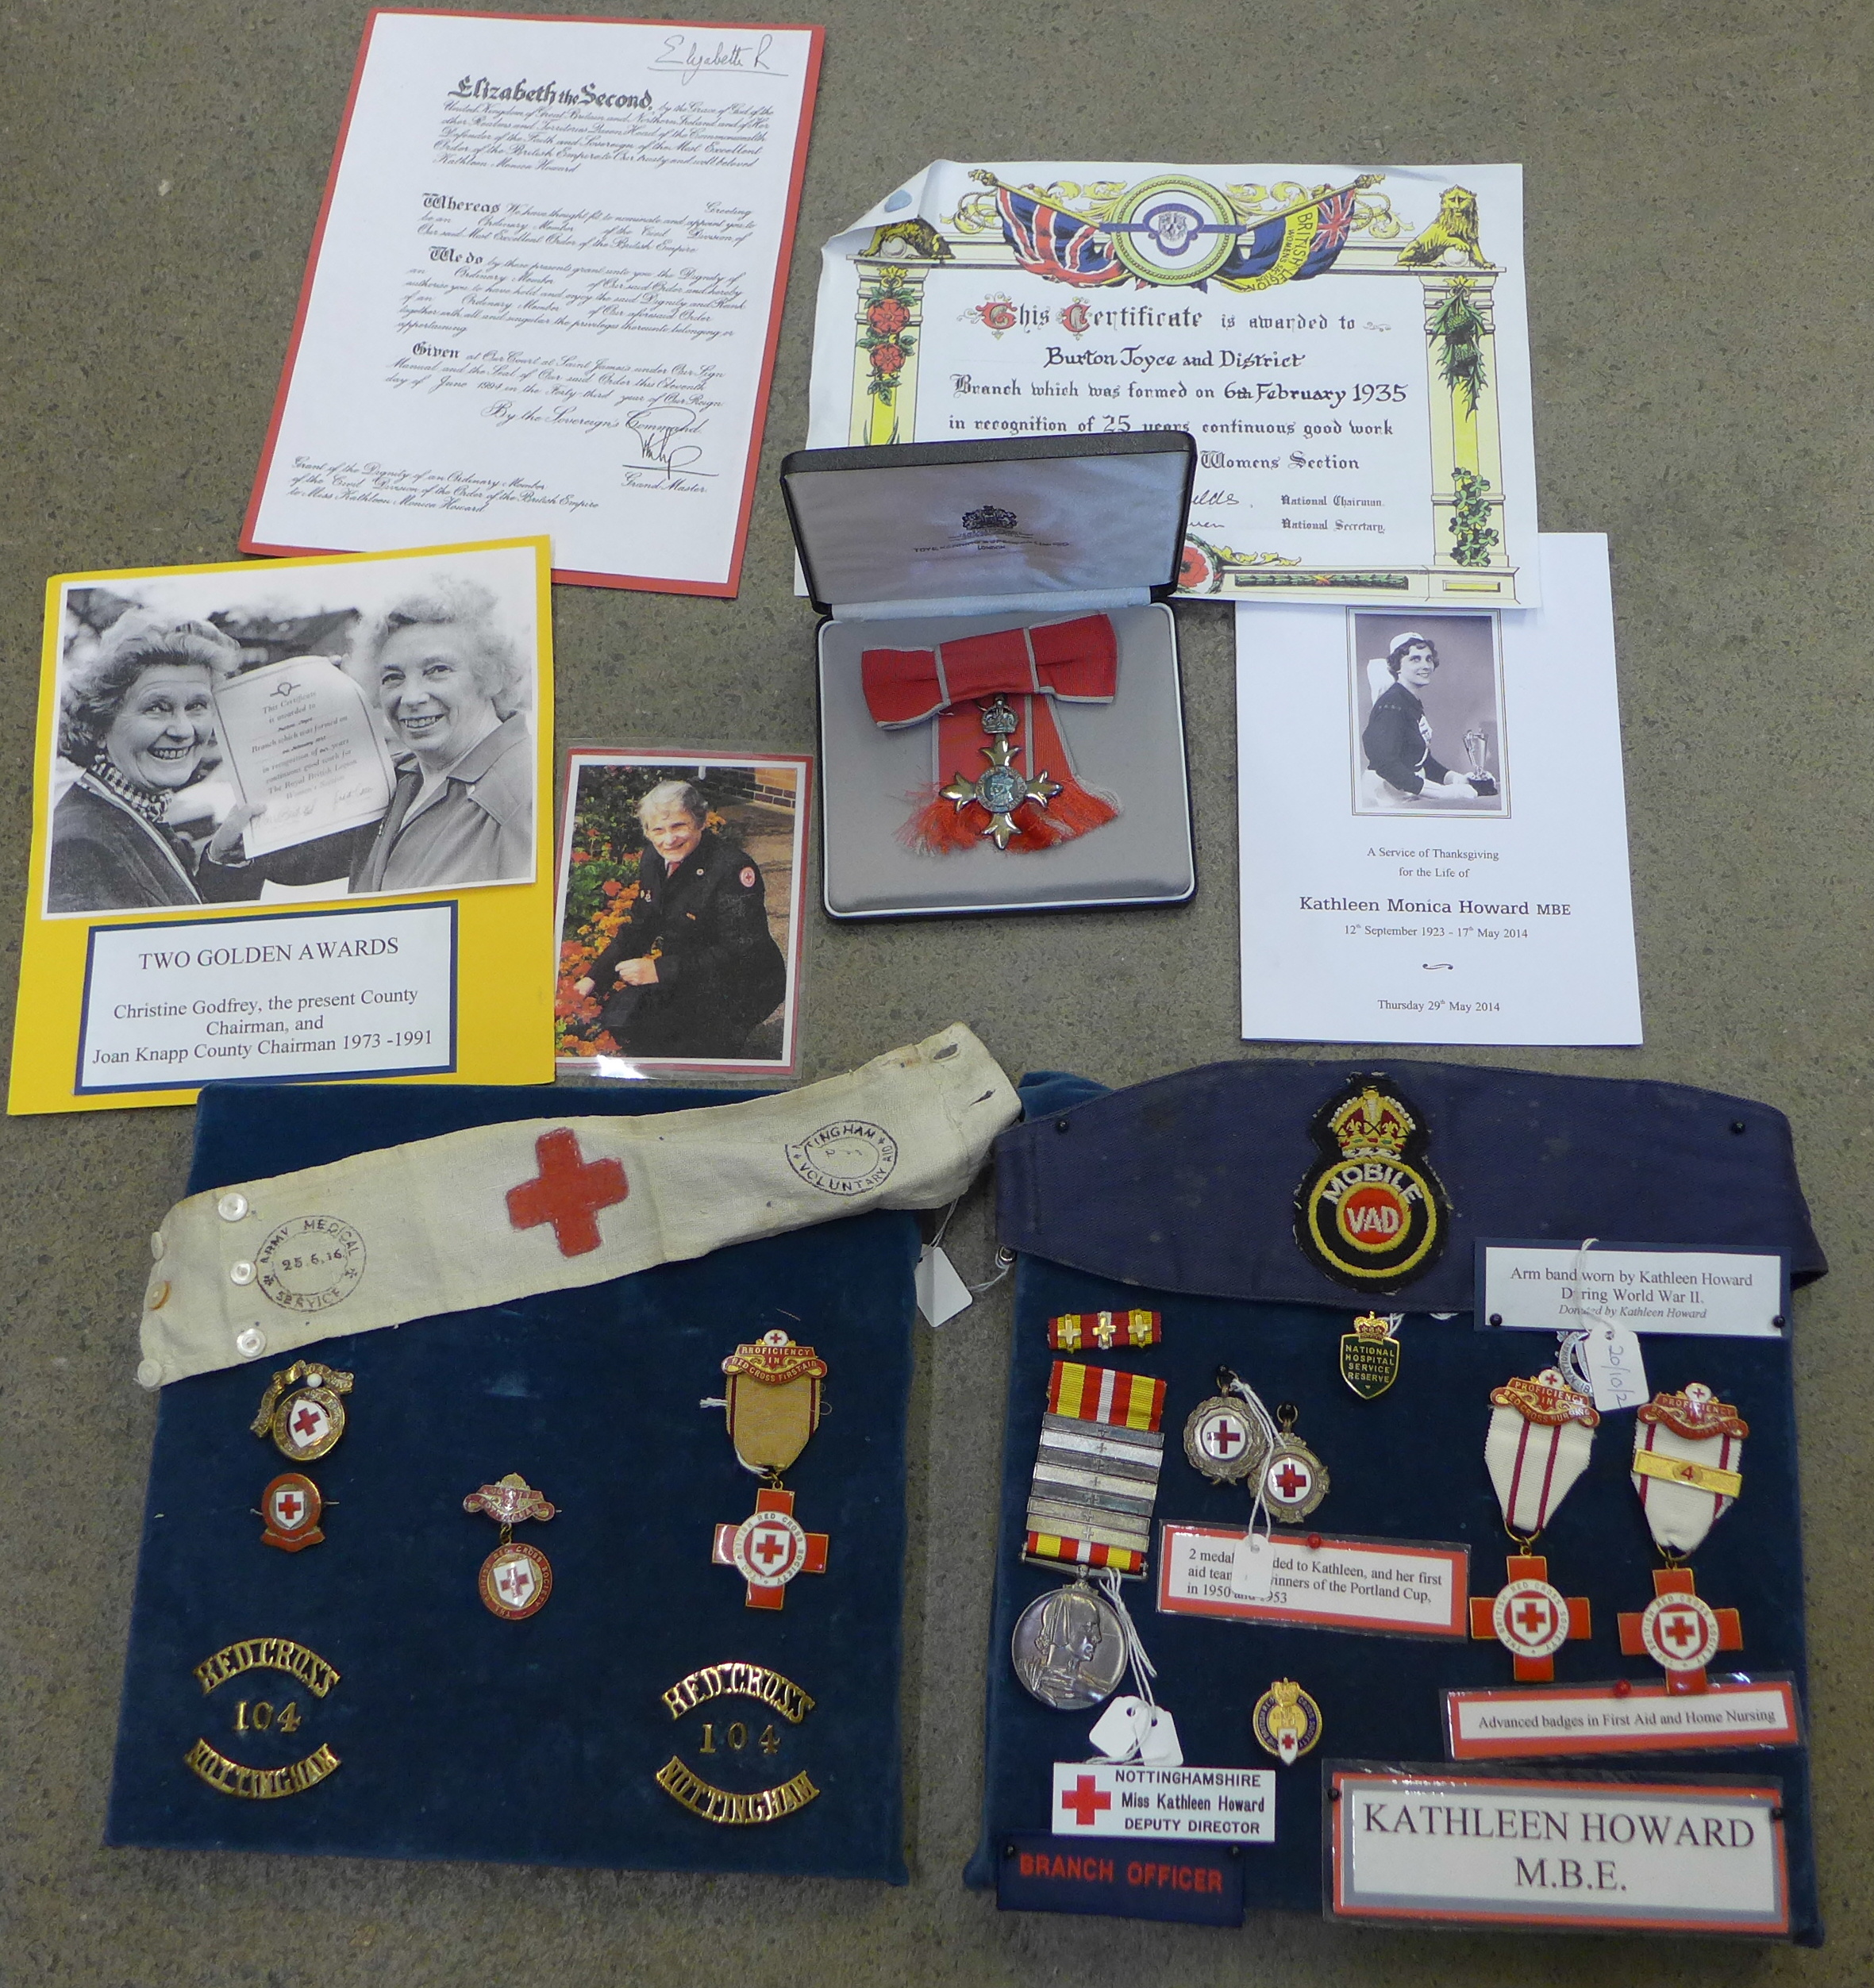 Kathleen Howard, M.B.E., a collection of medals, medallions and awards including M.B.E., Red Cross